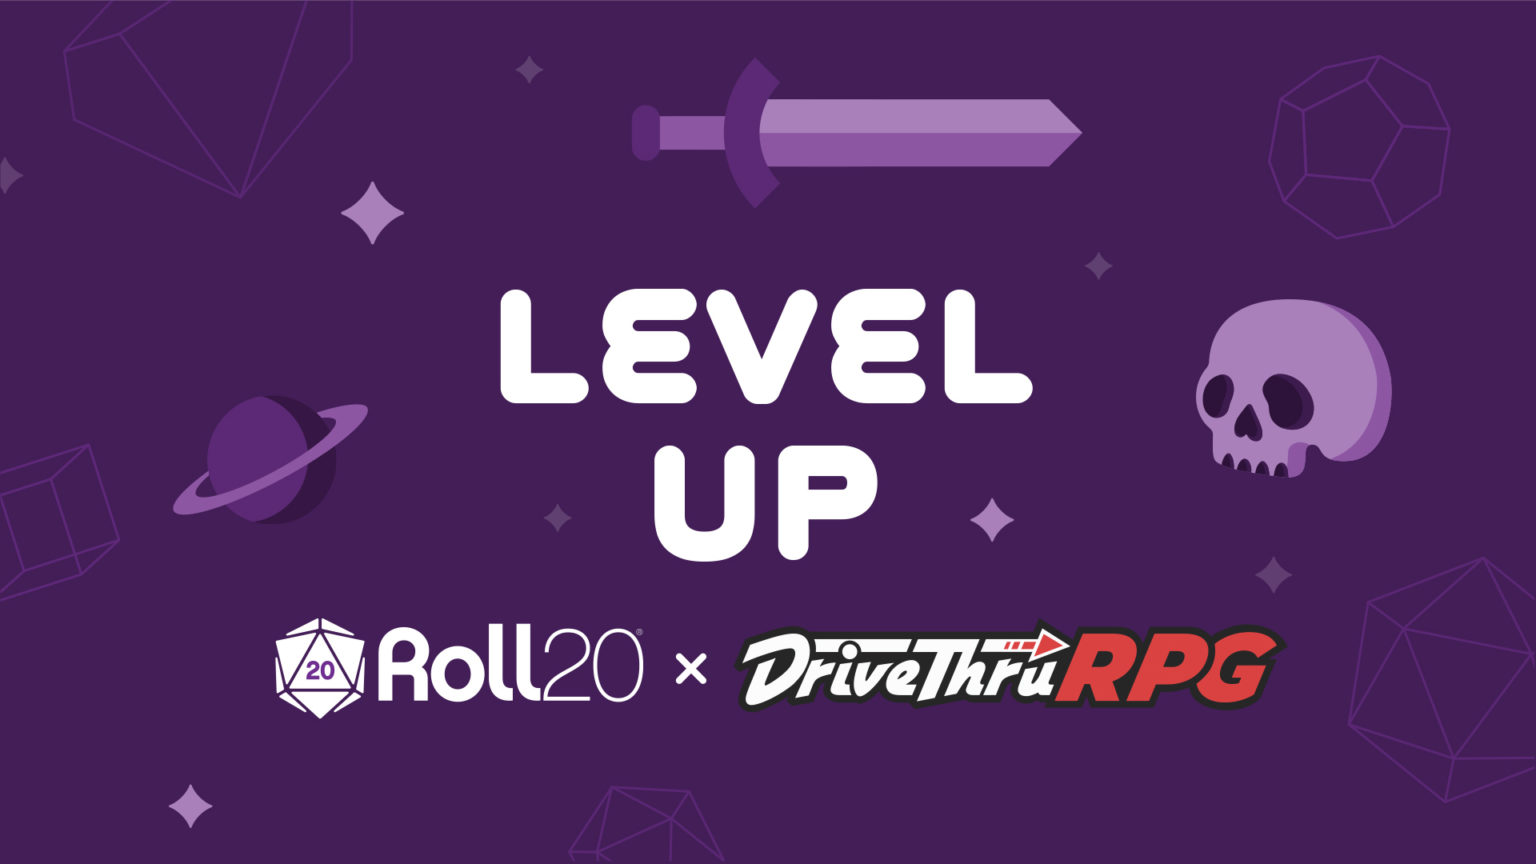 Level Up - Drive Thru RPG And Roll 20